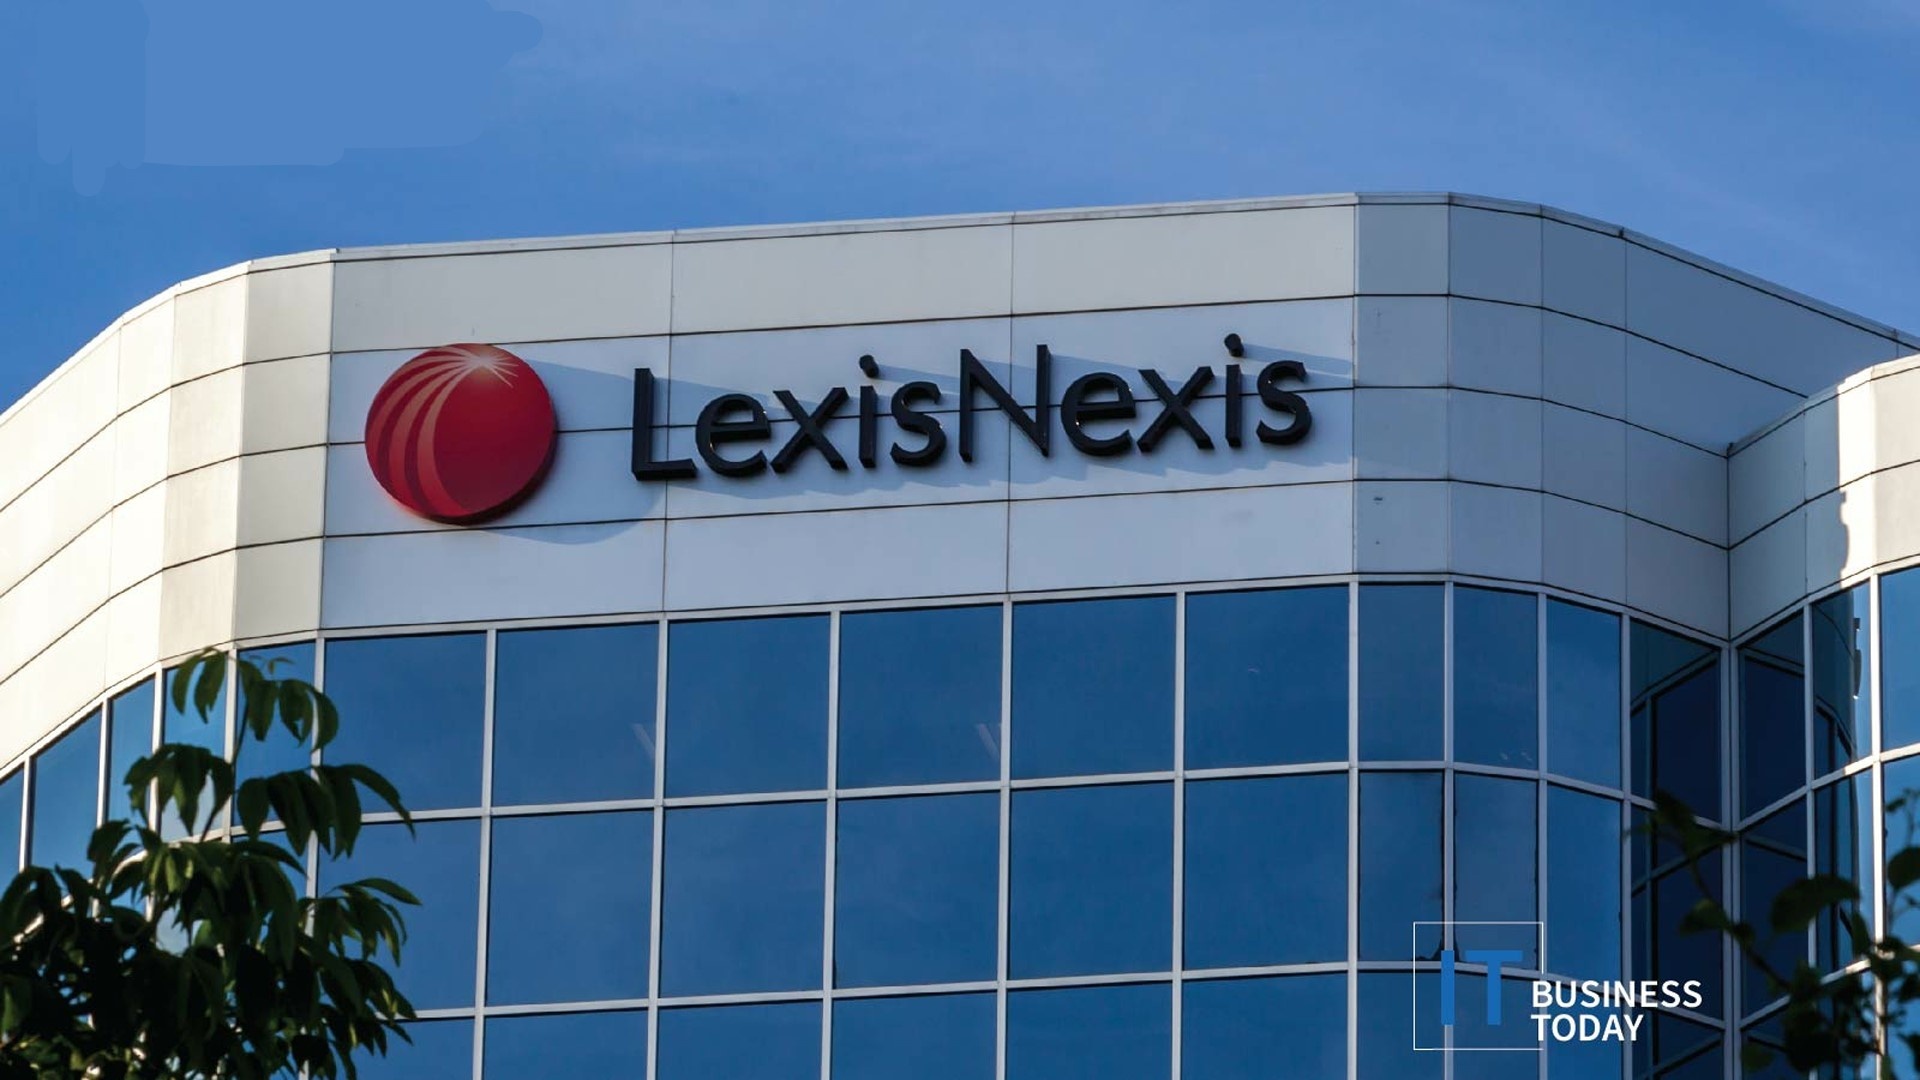 The LexisNexis (HQ) AT Park Avenue Viaduct, New York, NY, USA (Credits IT Business Today)